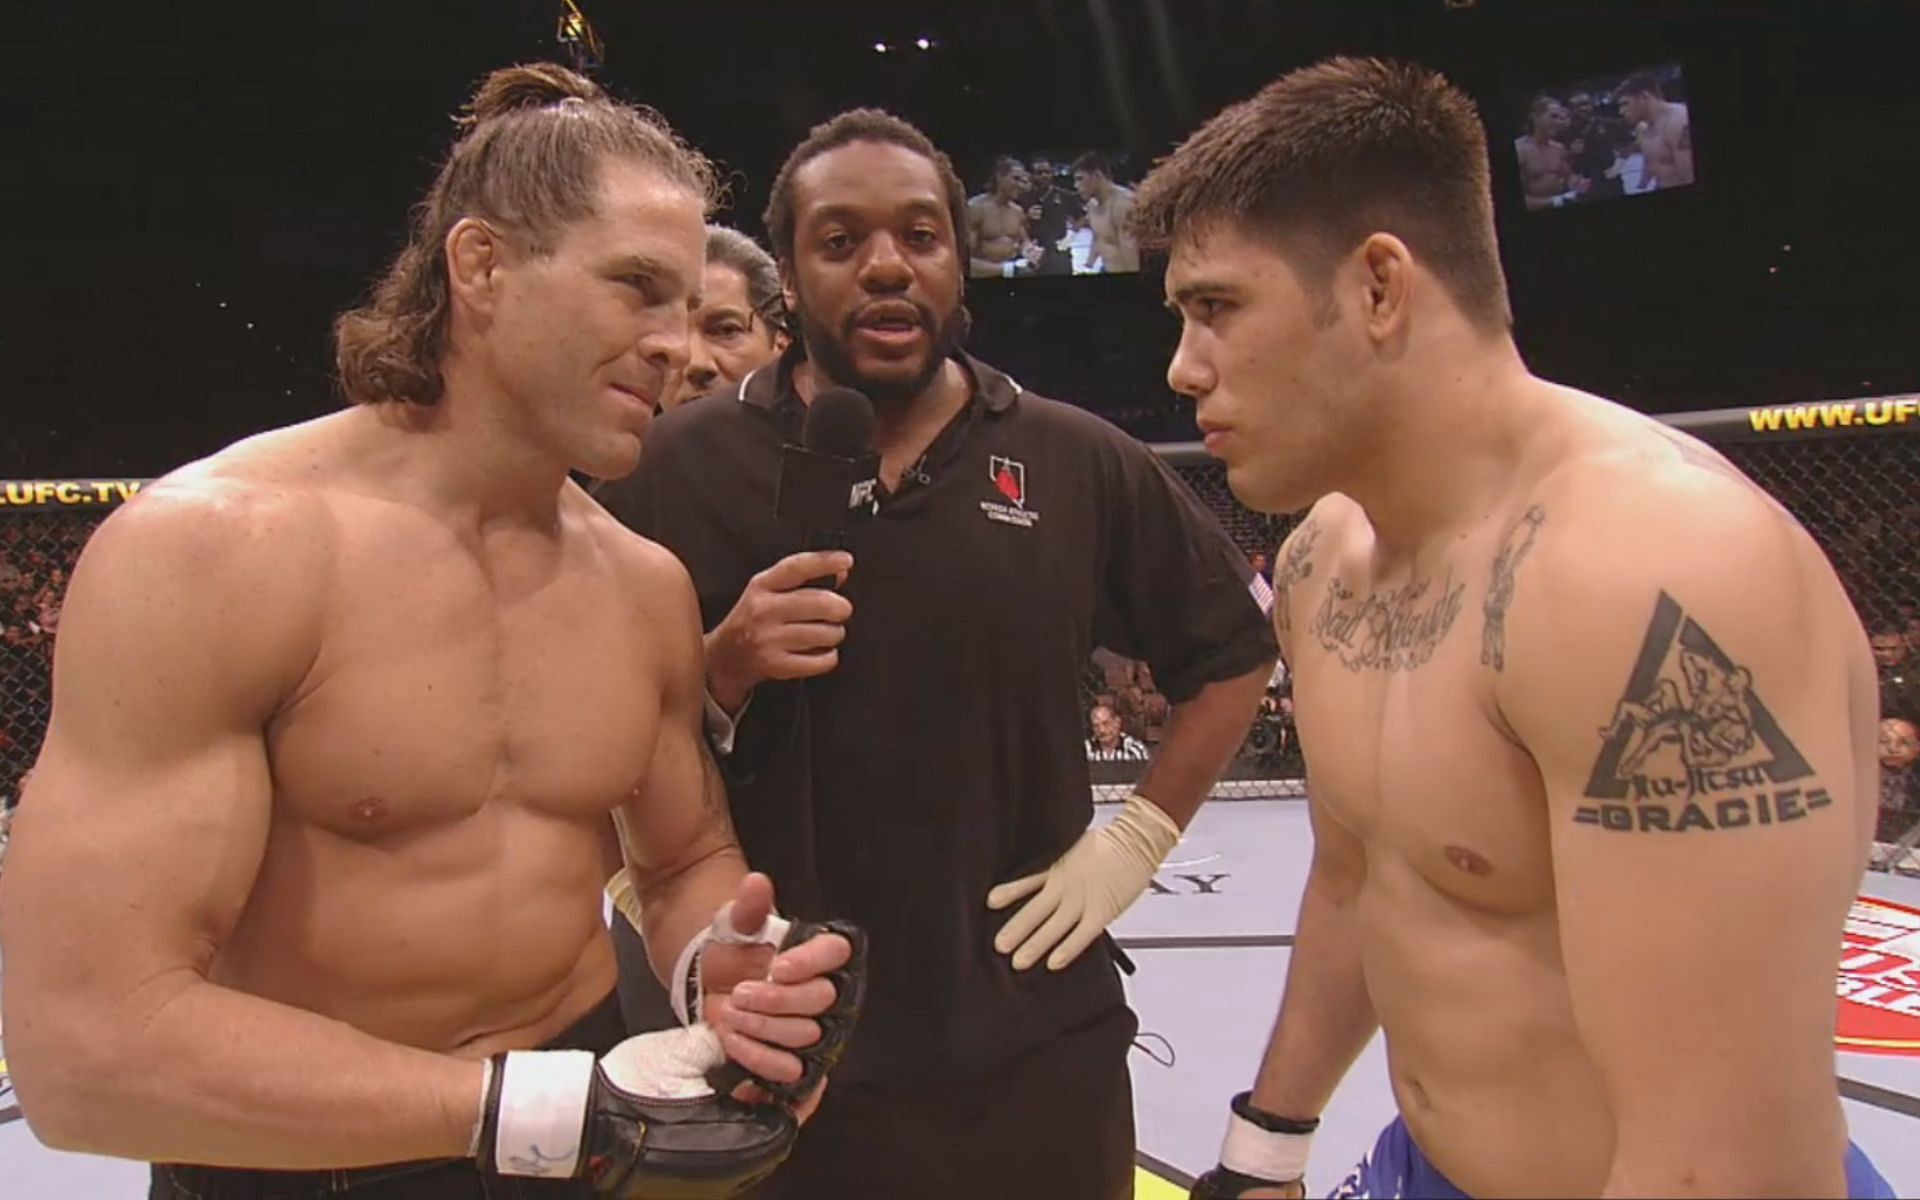 David Terrell (right) never lived up to his massive potential inside the octagon